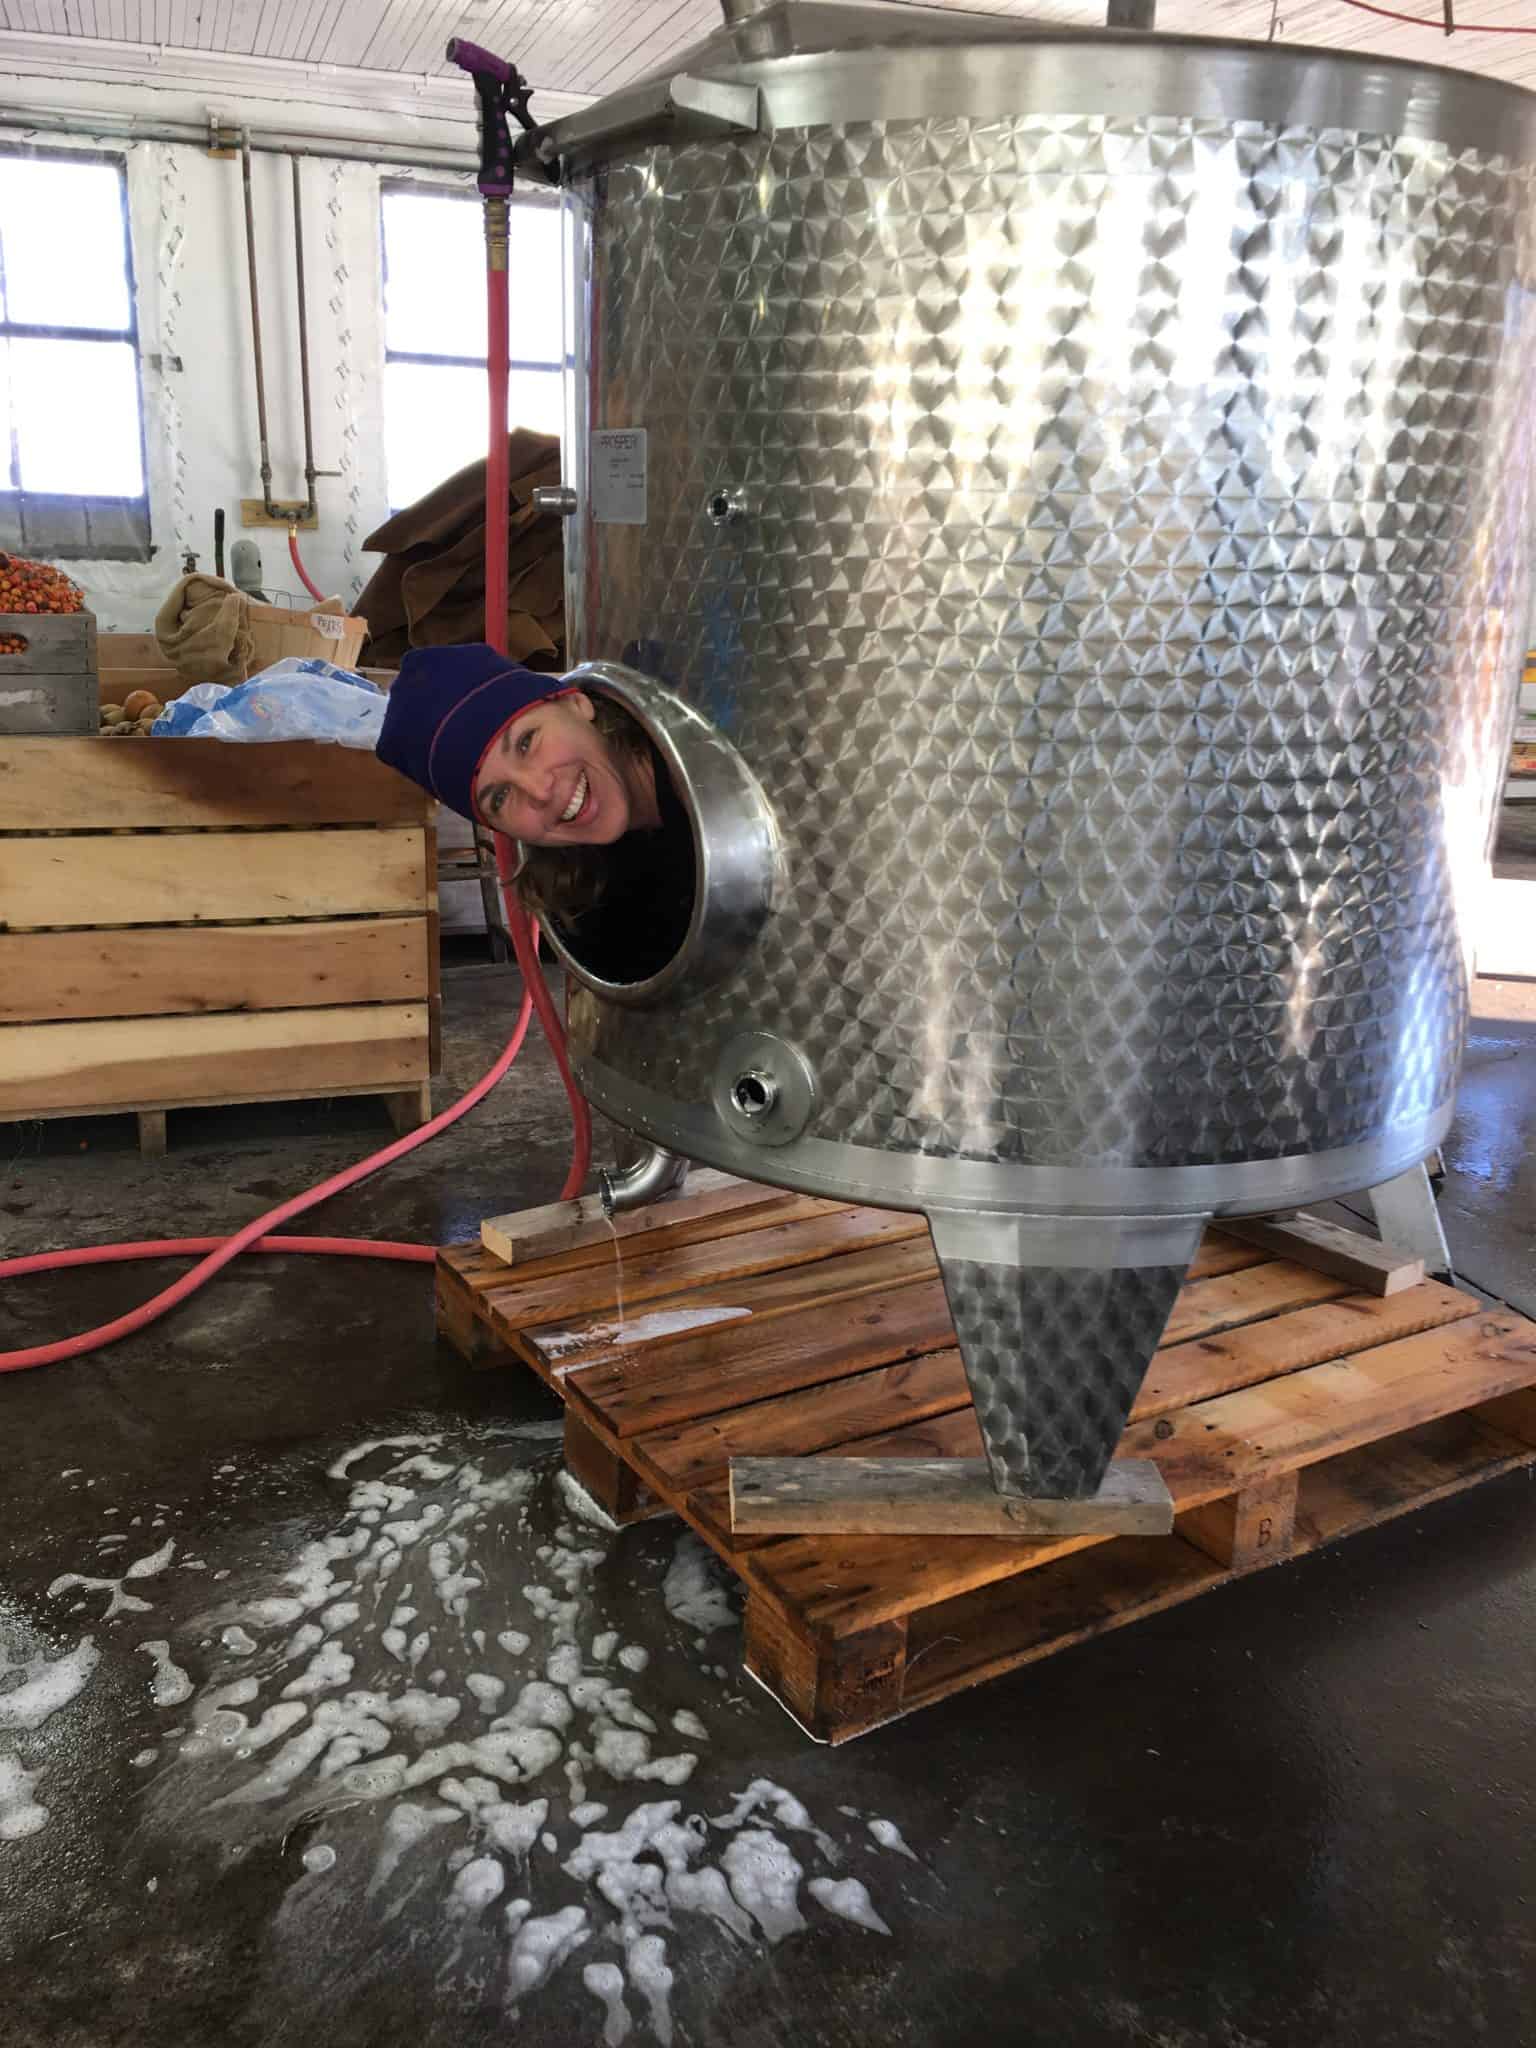 Washing tanks in the cidery.